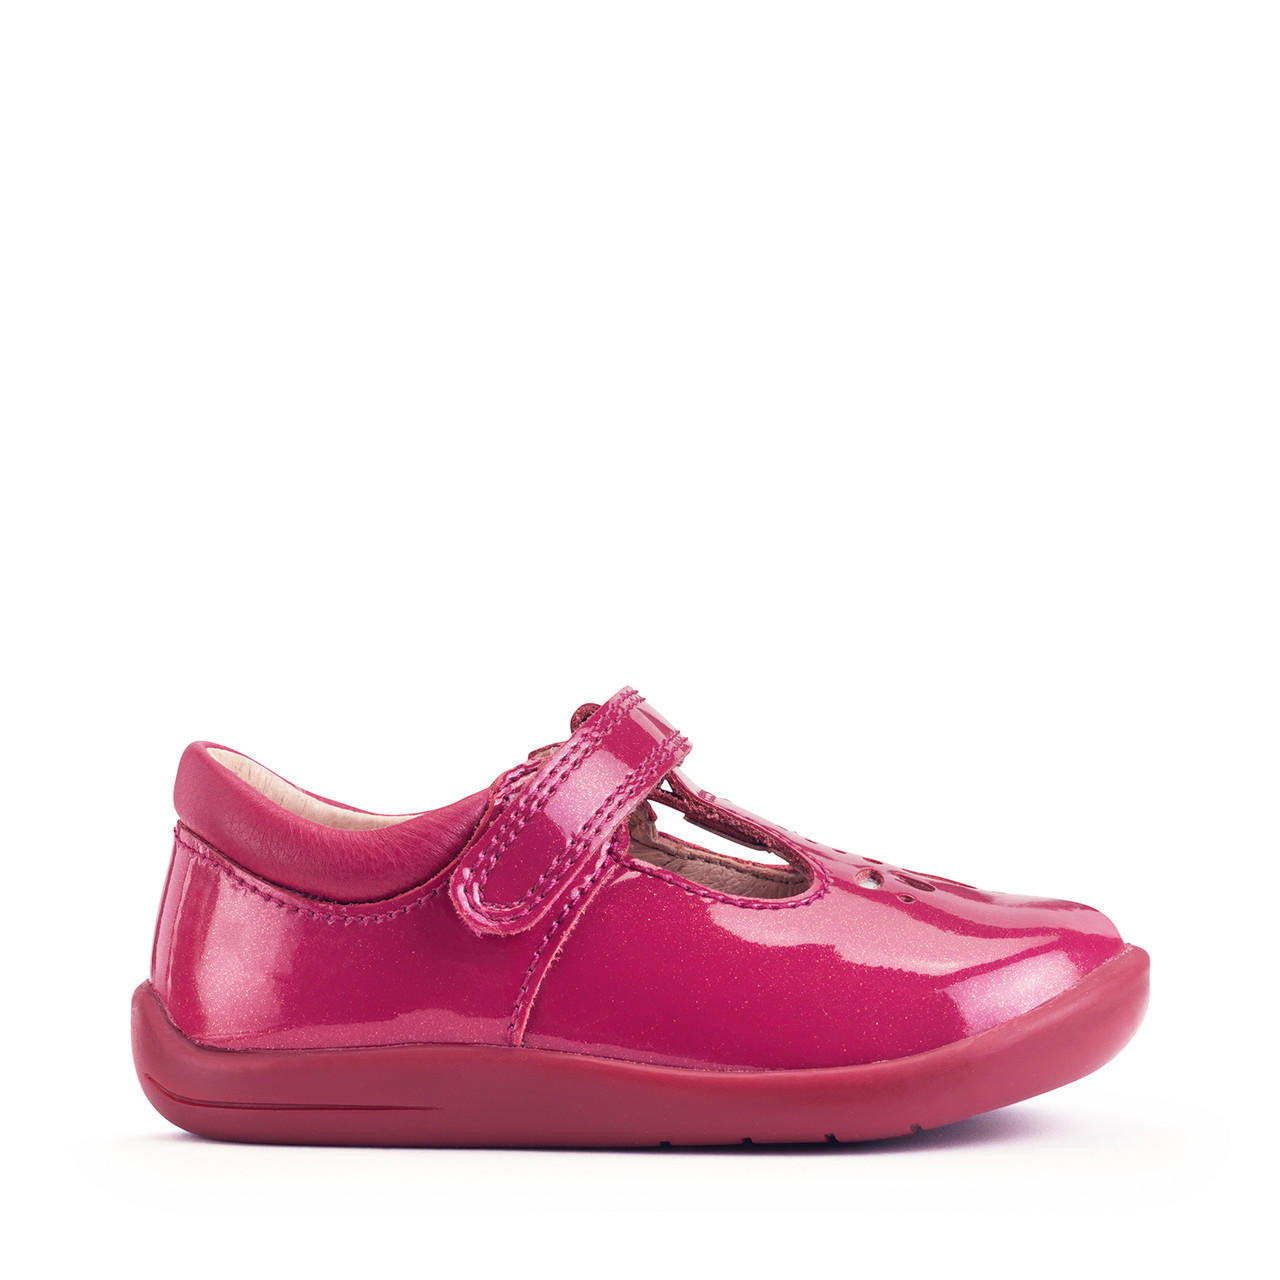 Start-Rite | Puzzle | Girls First T-Bar Shoe | Red Glitter Patent Leather